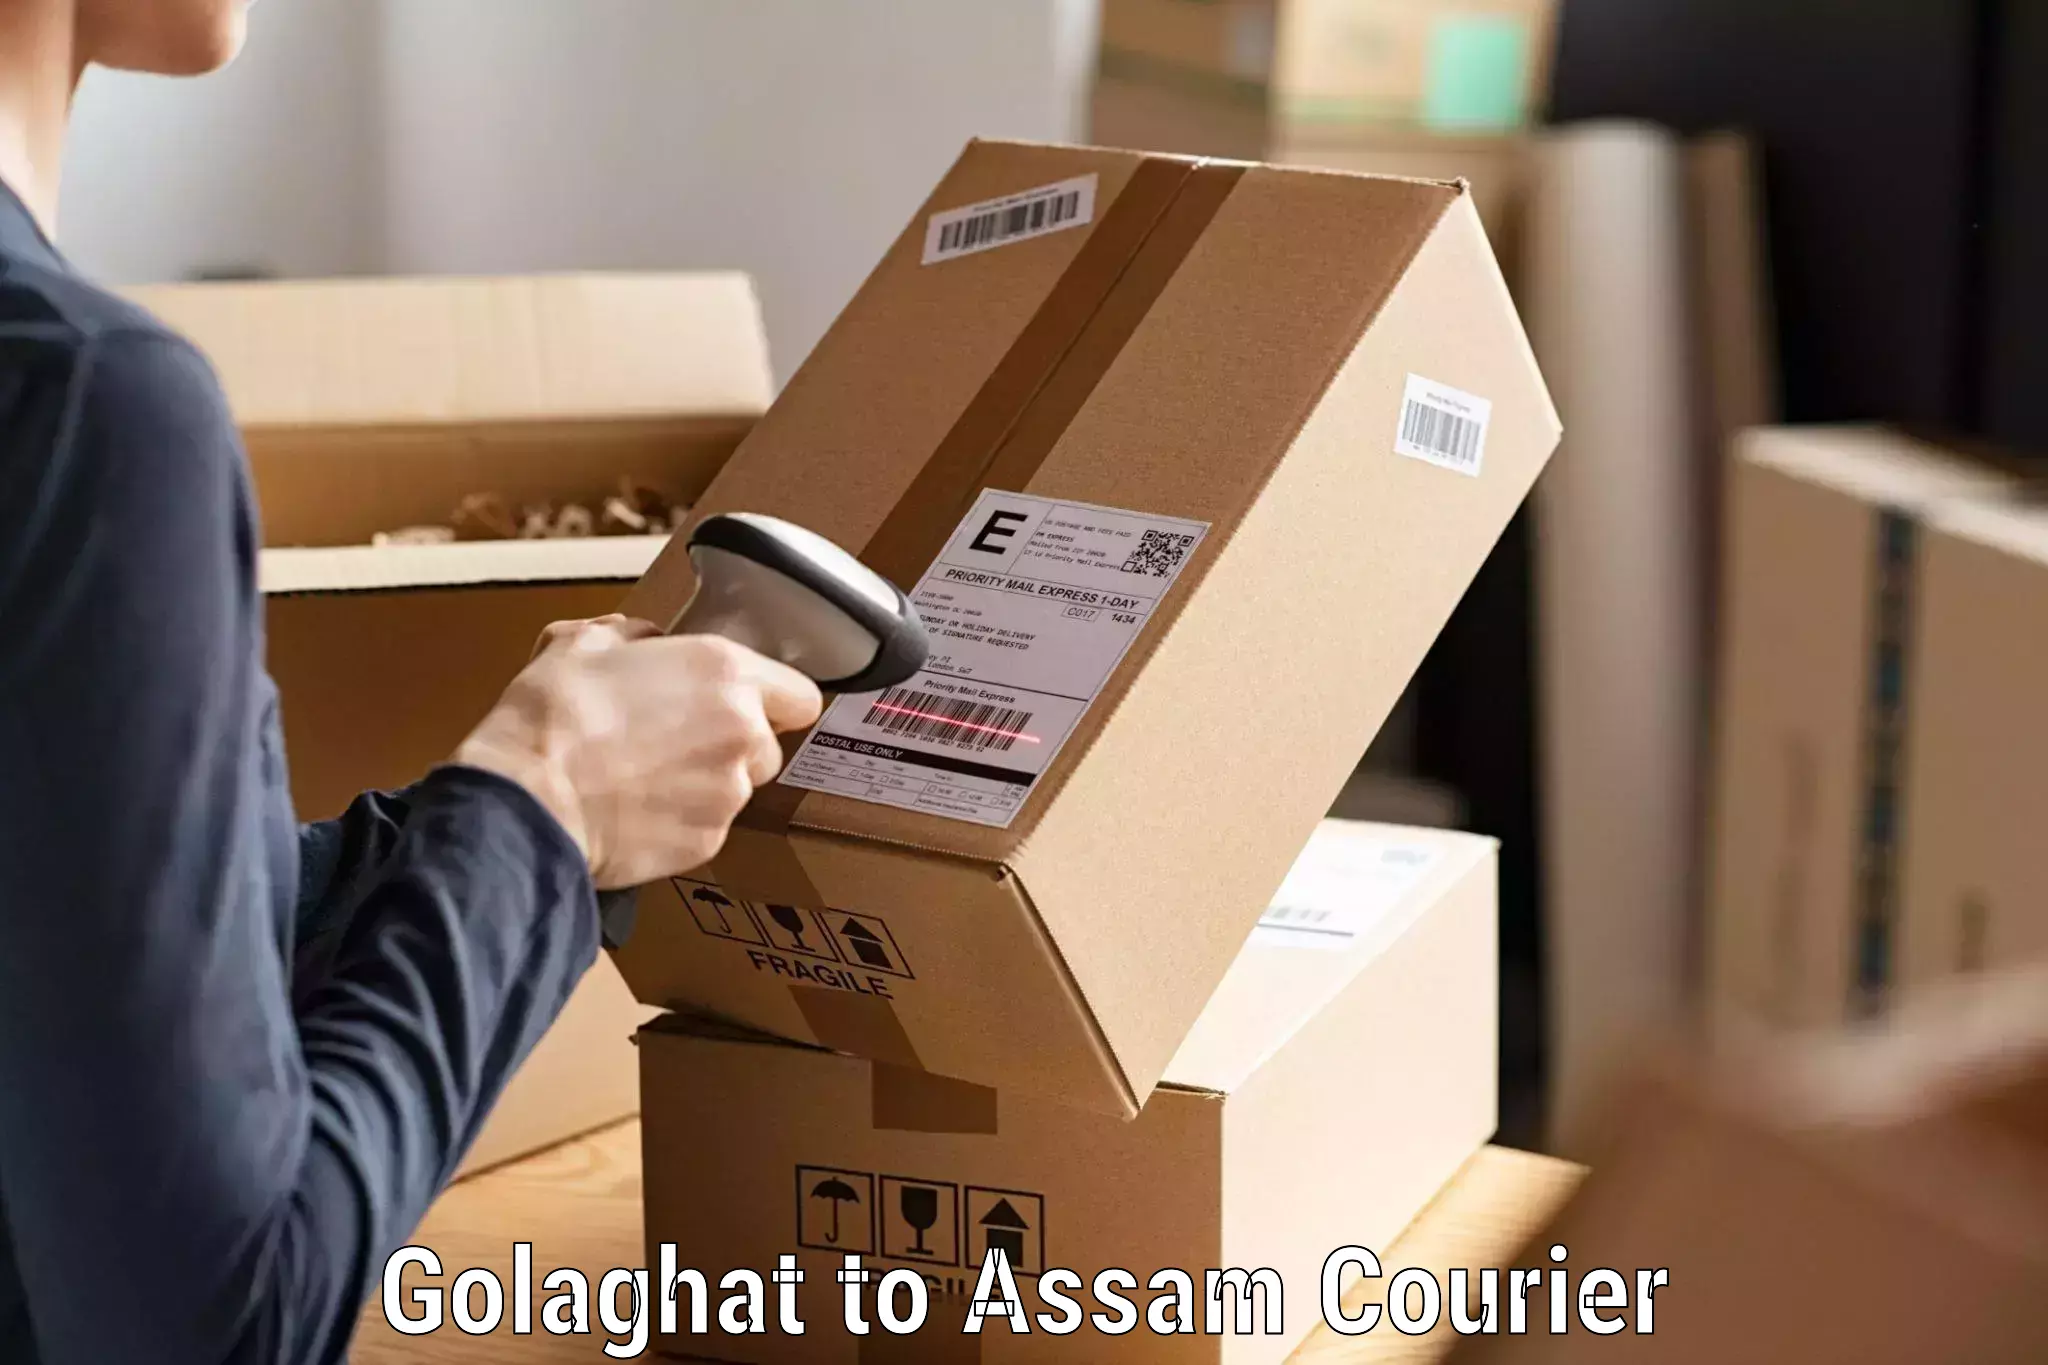 Customer-centric shipping Golaghat to Guwahati University